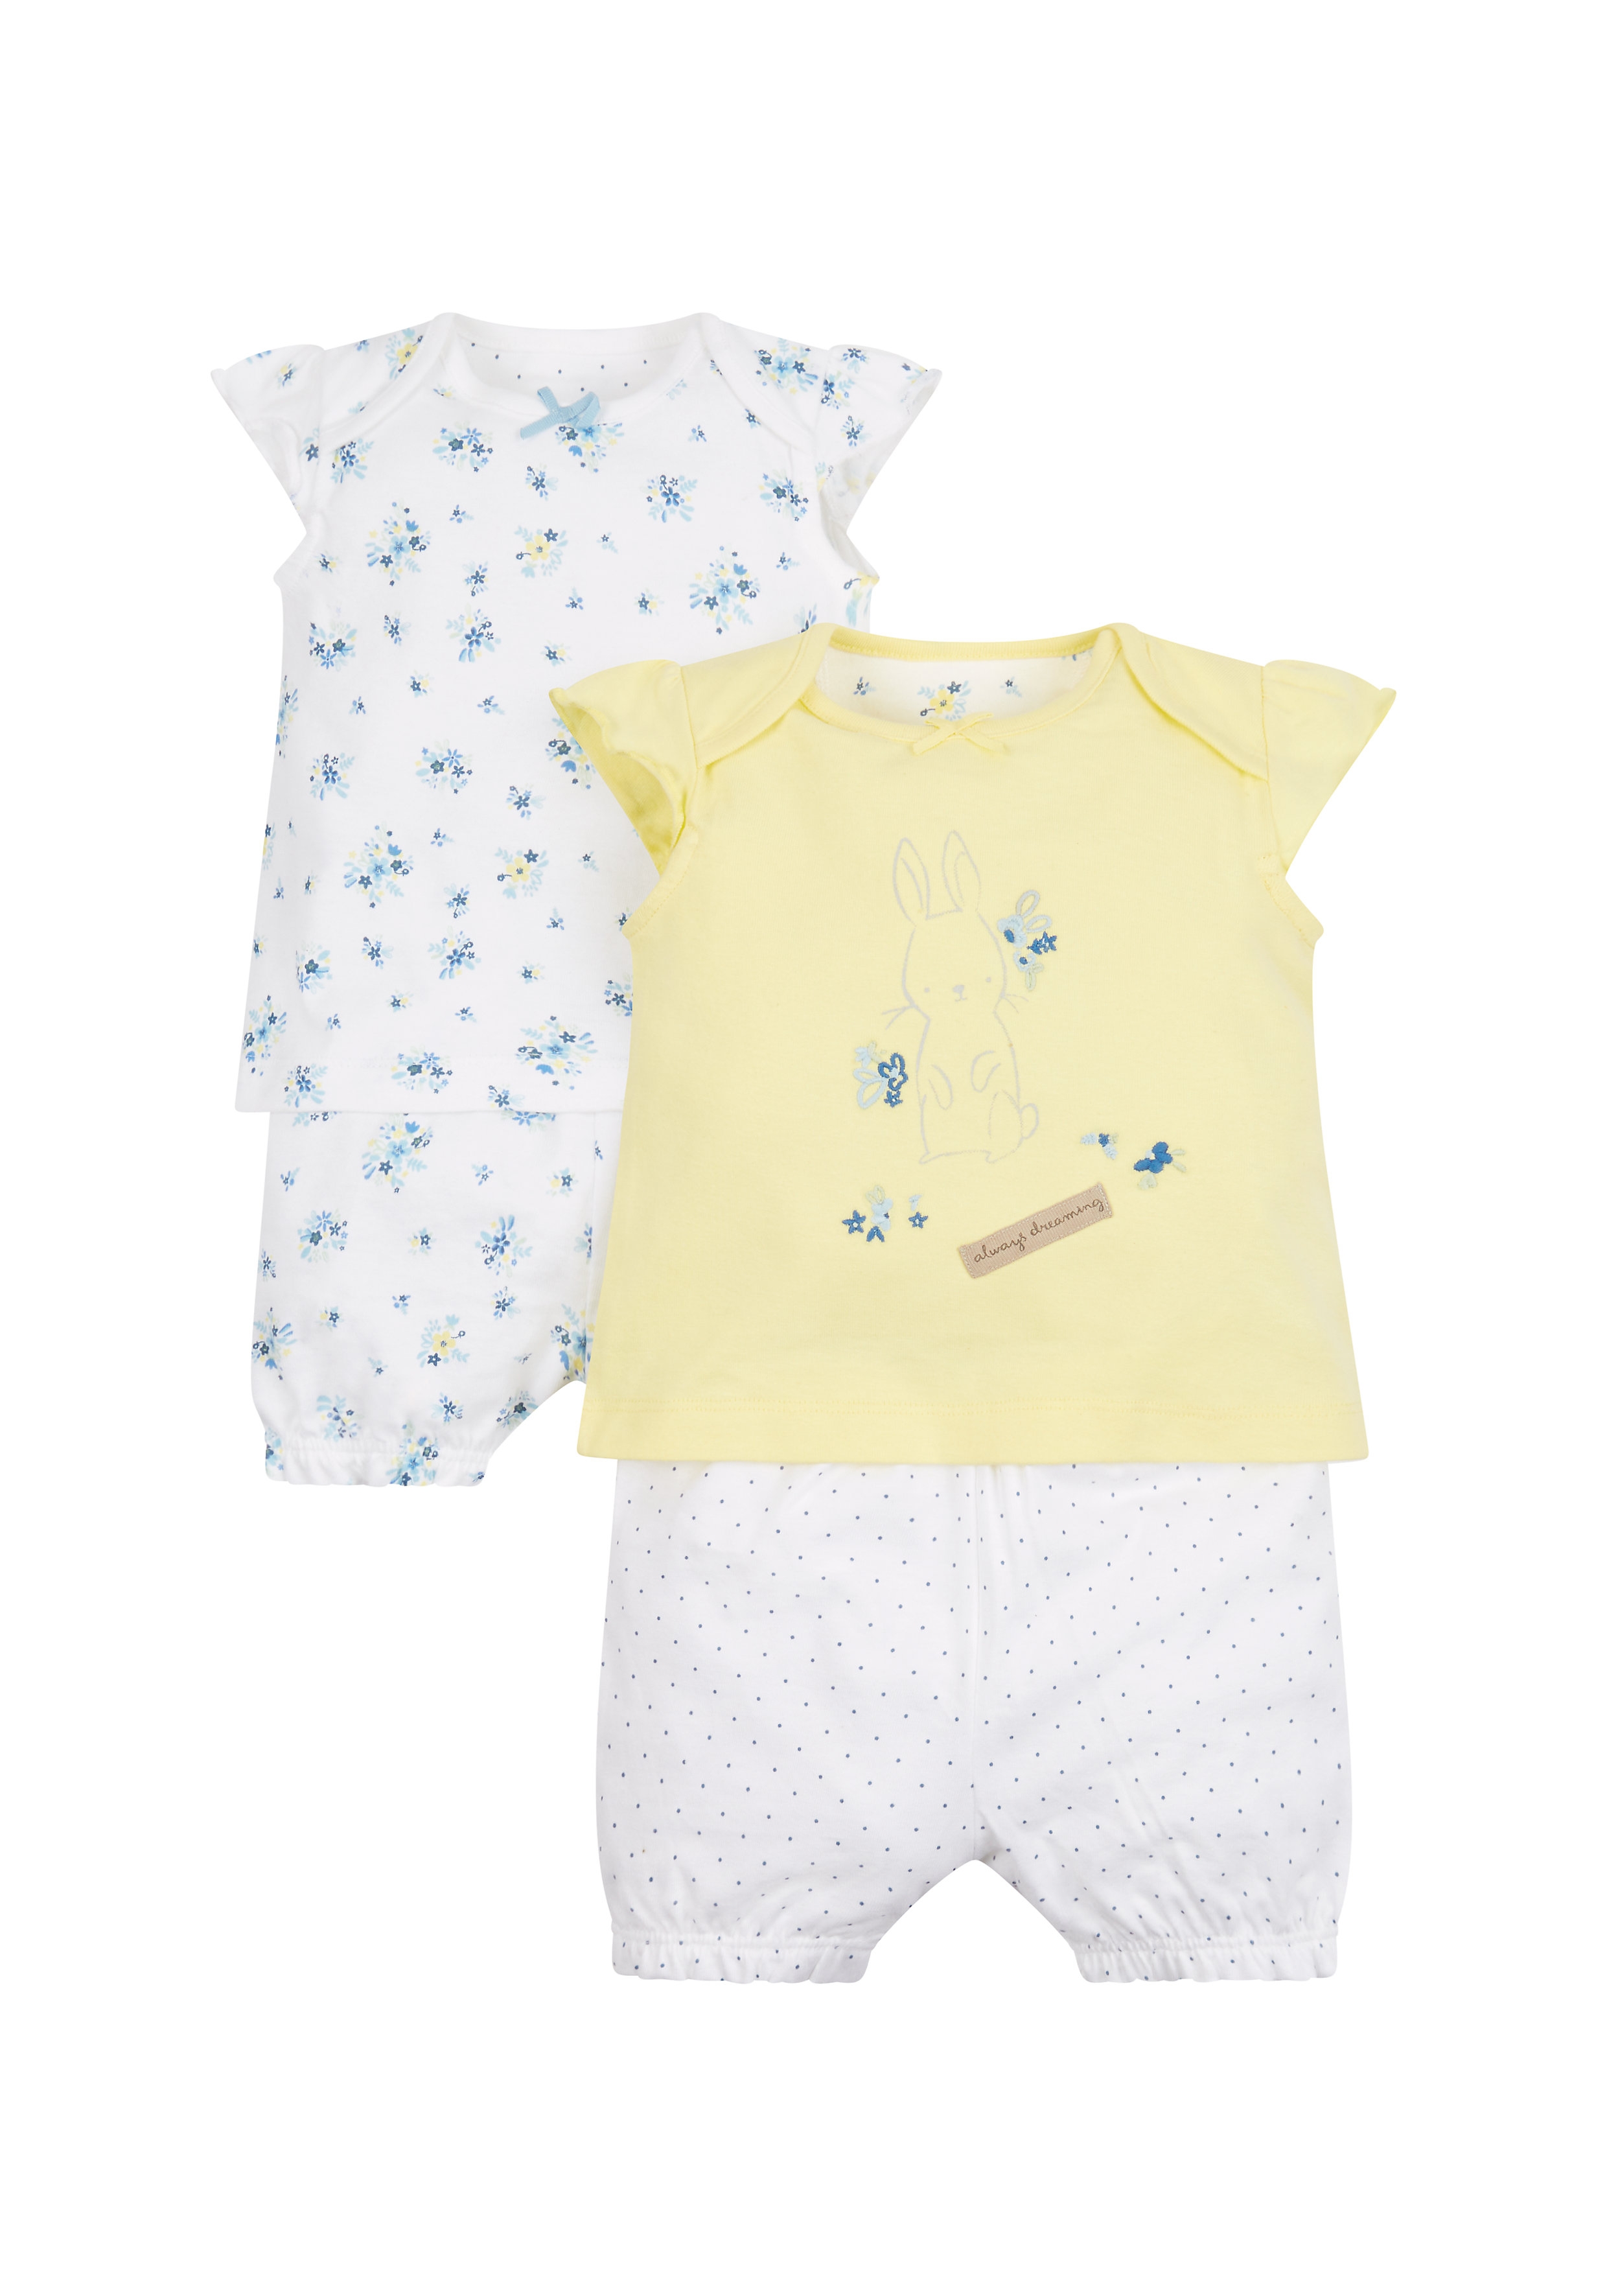 White and Yellow Printed Nightsuit - Pack of 2